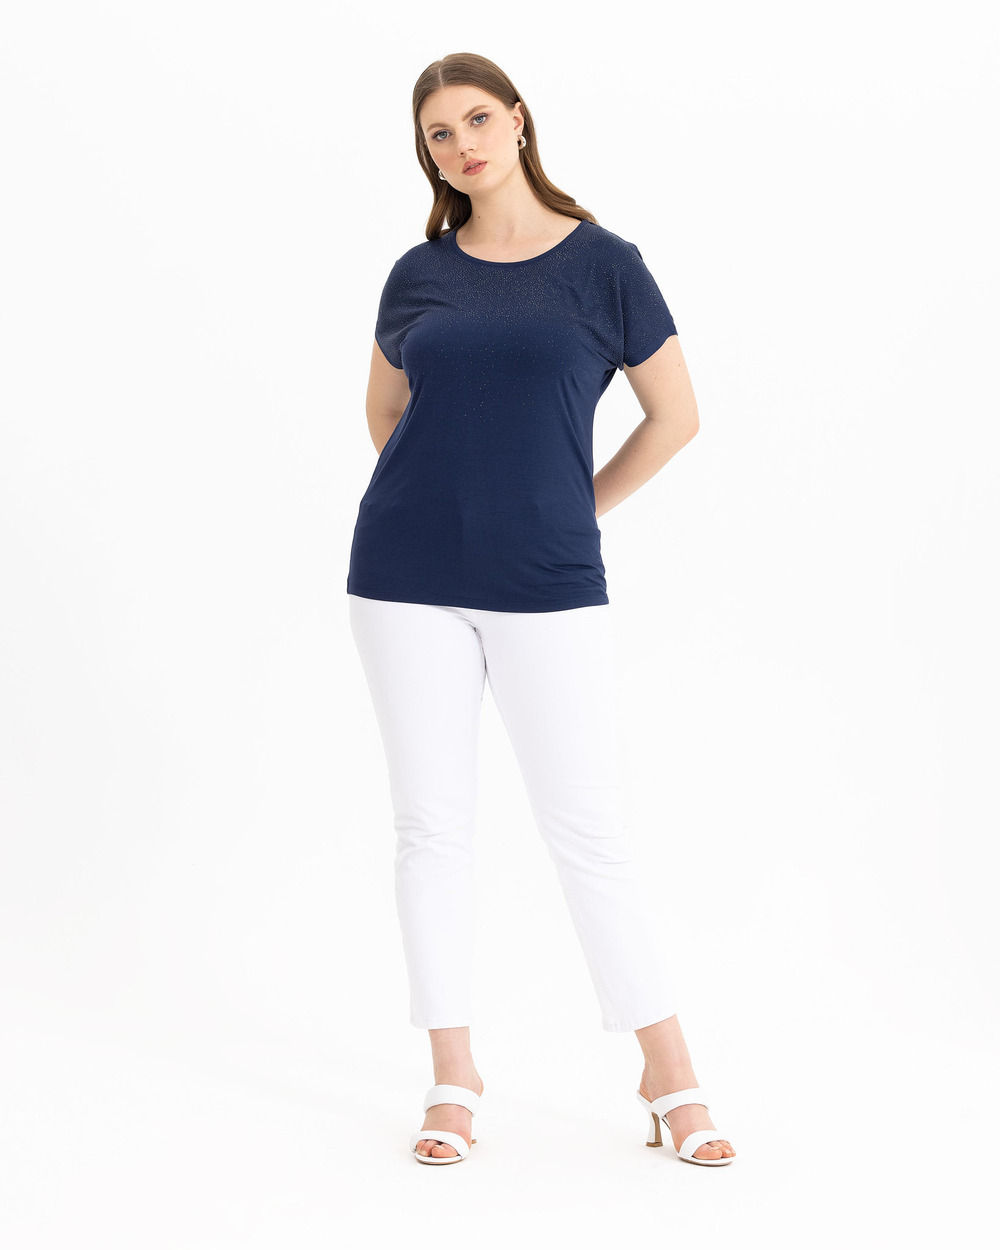 ROUND NECK T-SHIRT WITH STONES